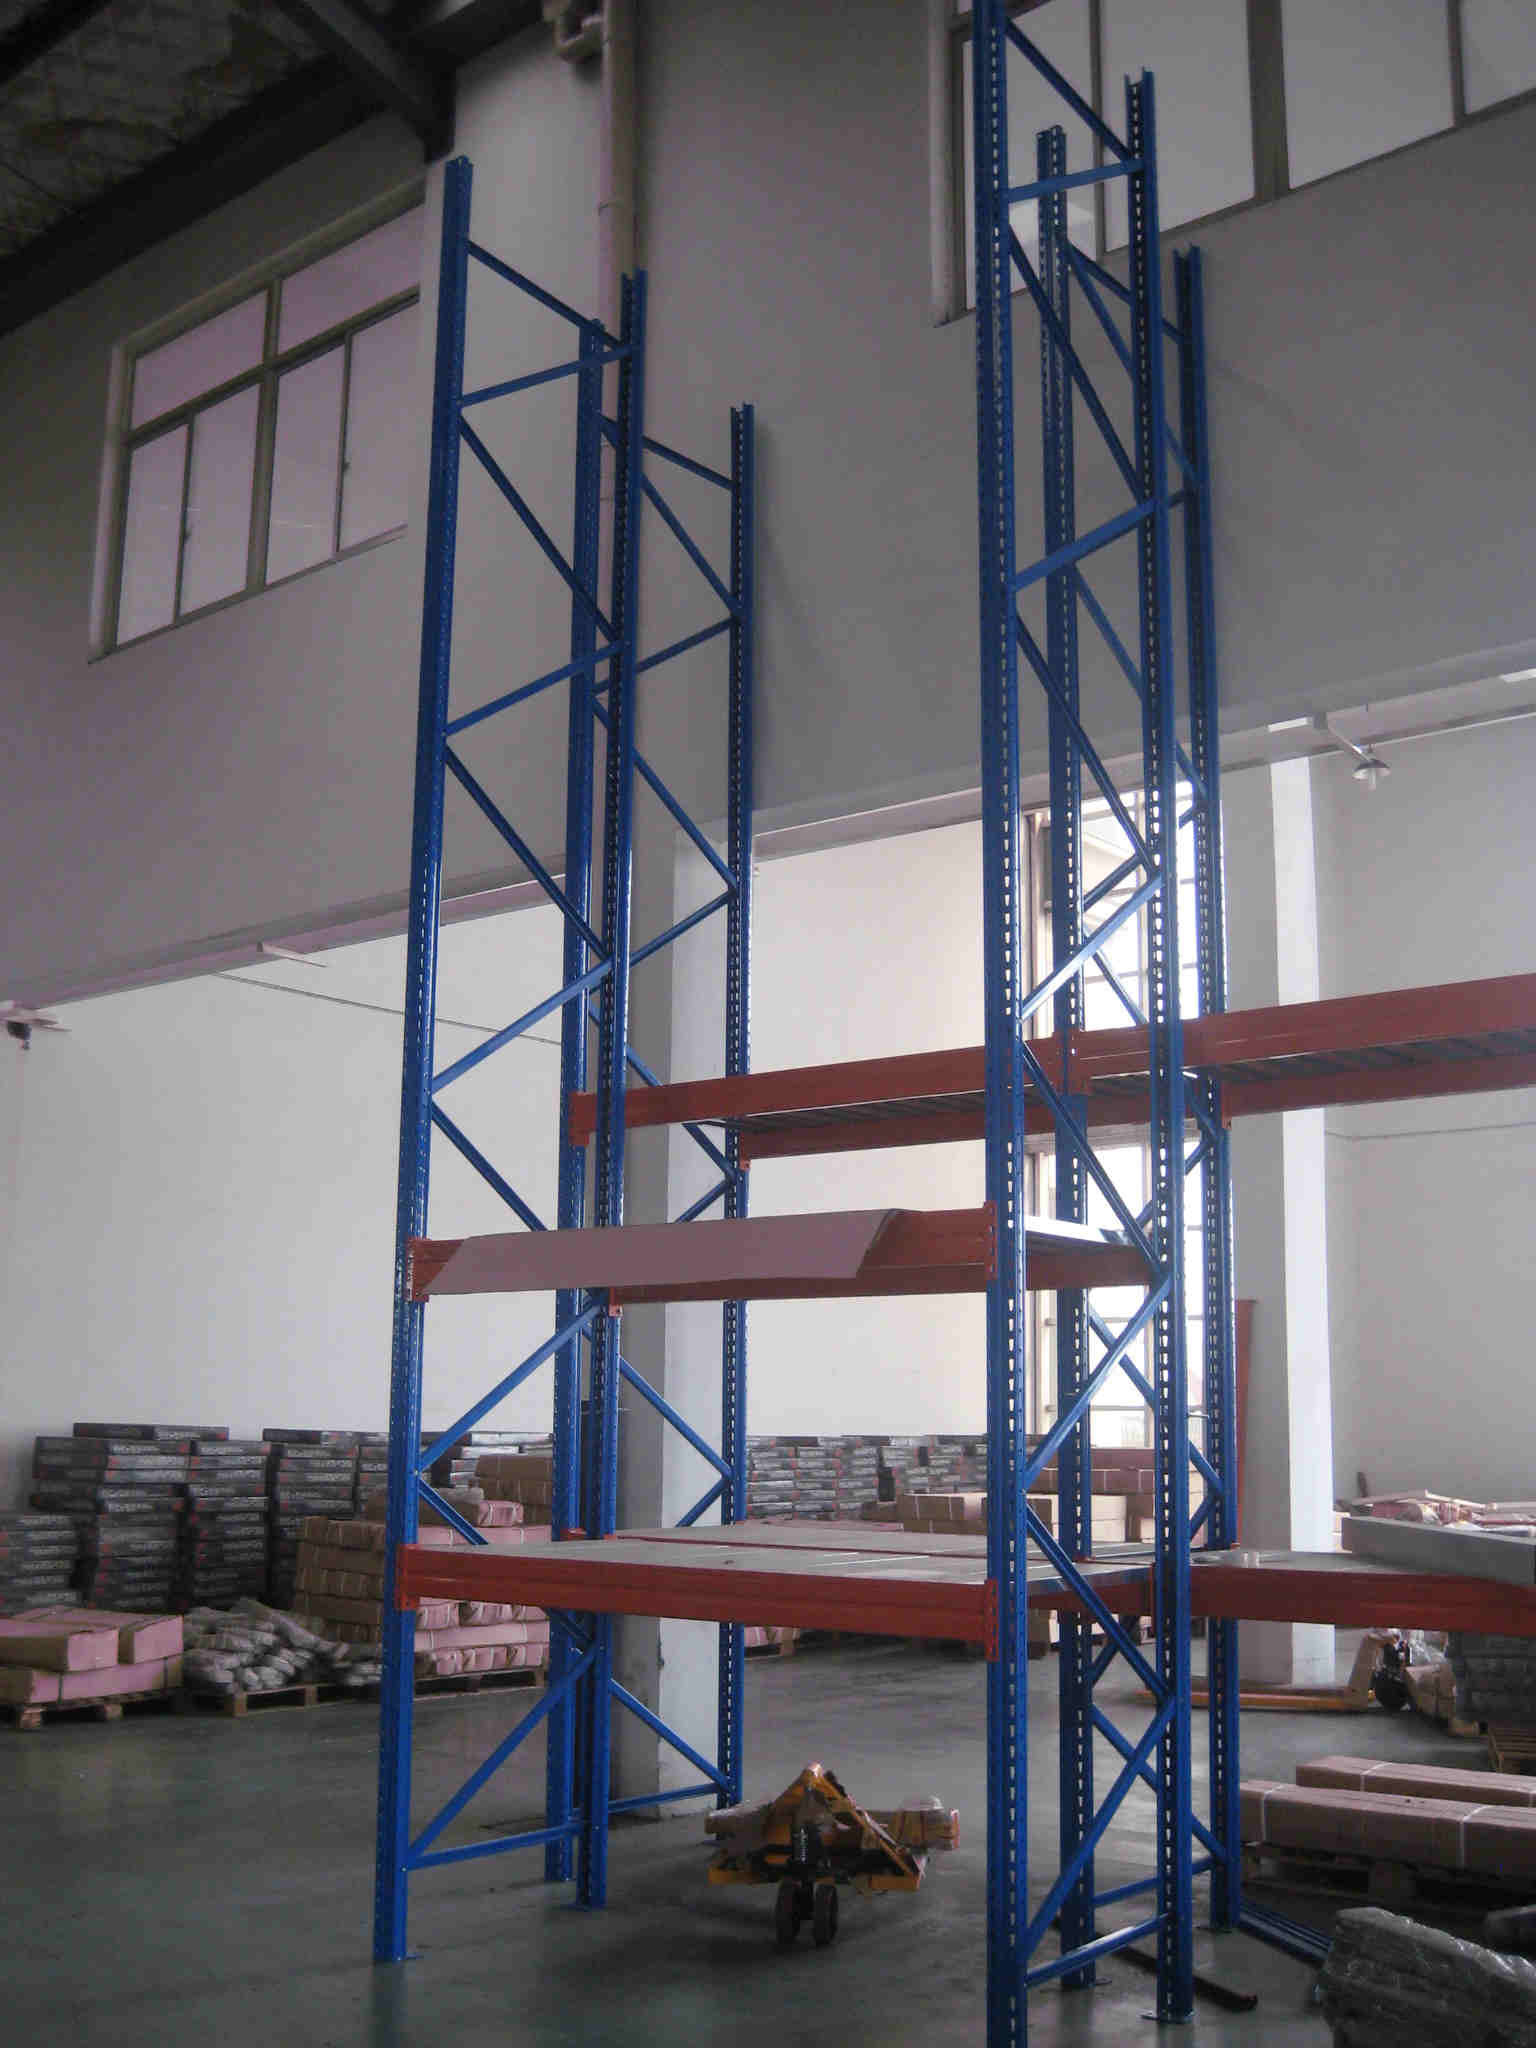  Heavy Duty Warehouse Storage Racks Stocking Iron Rack With Knockdown Structure Manufactures